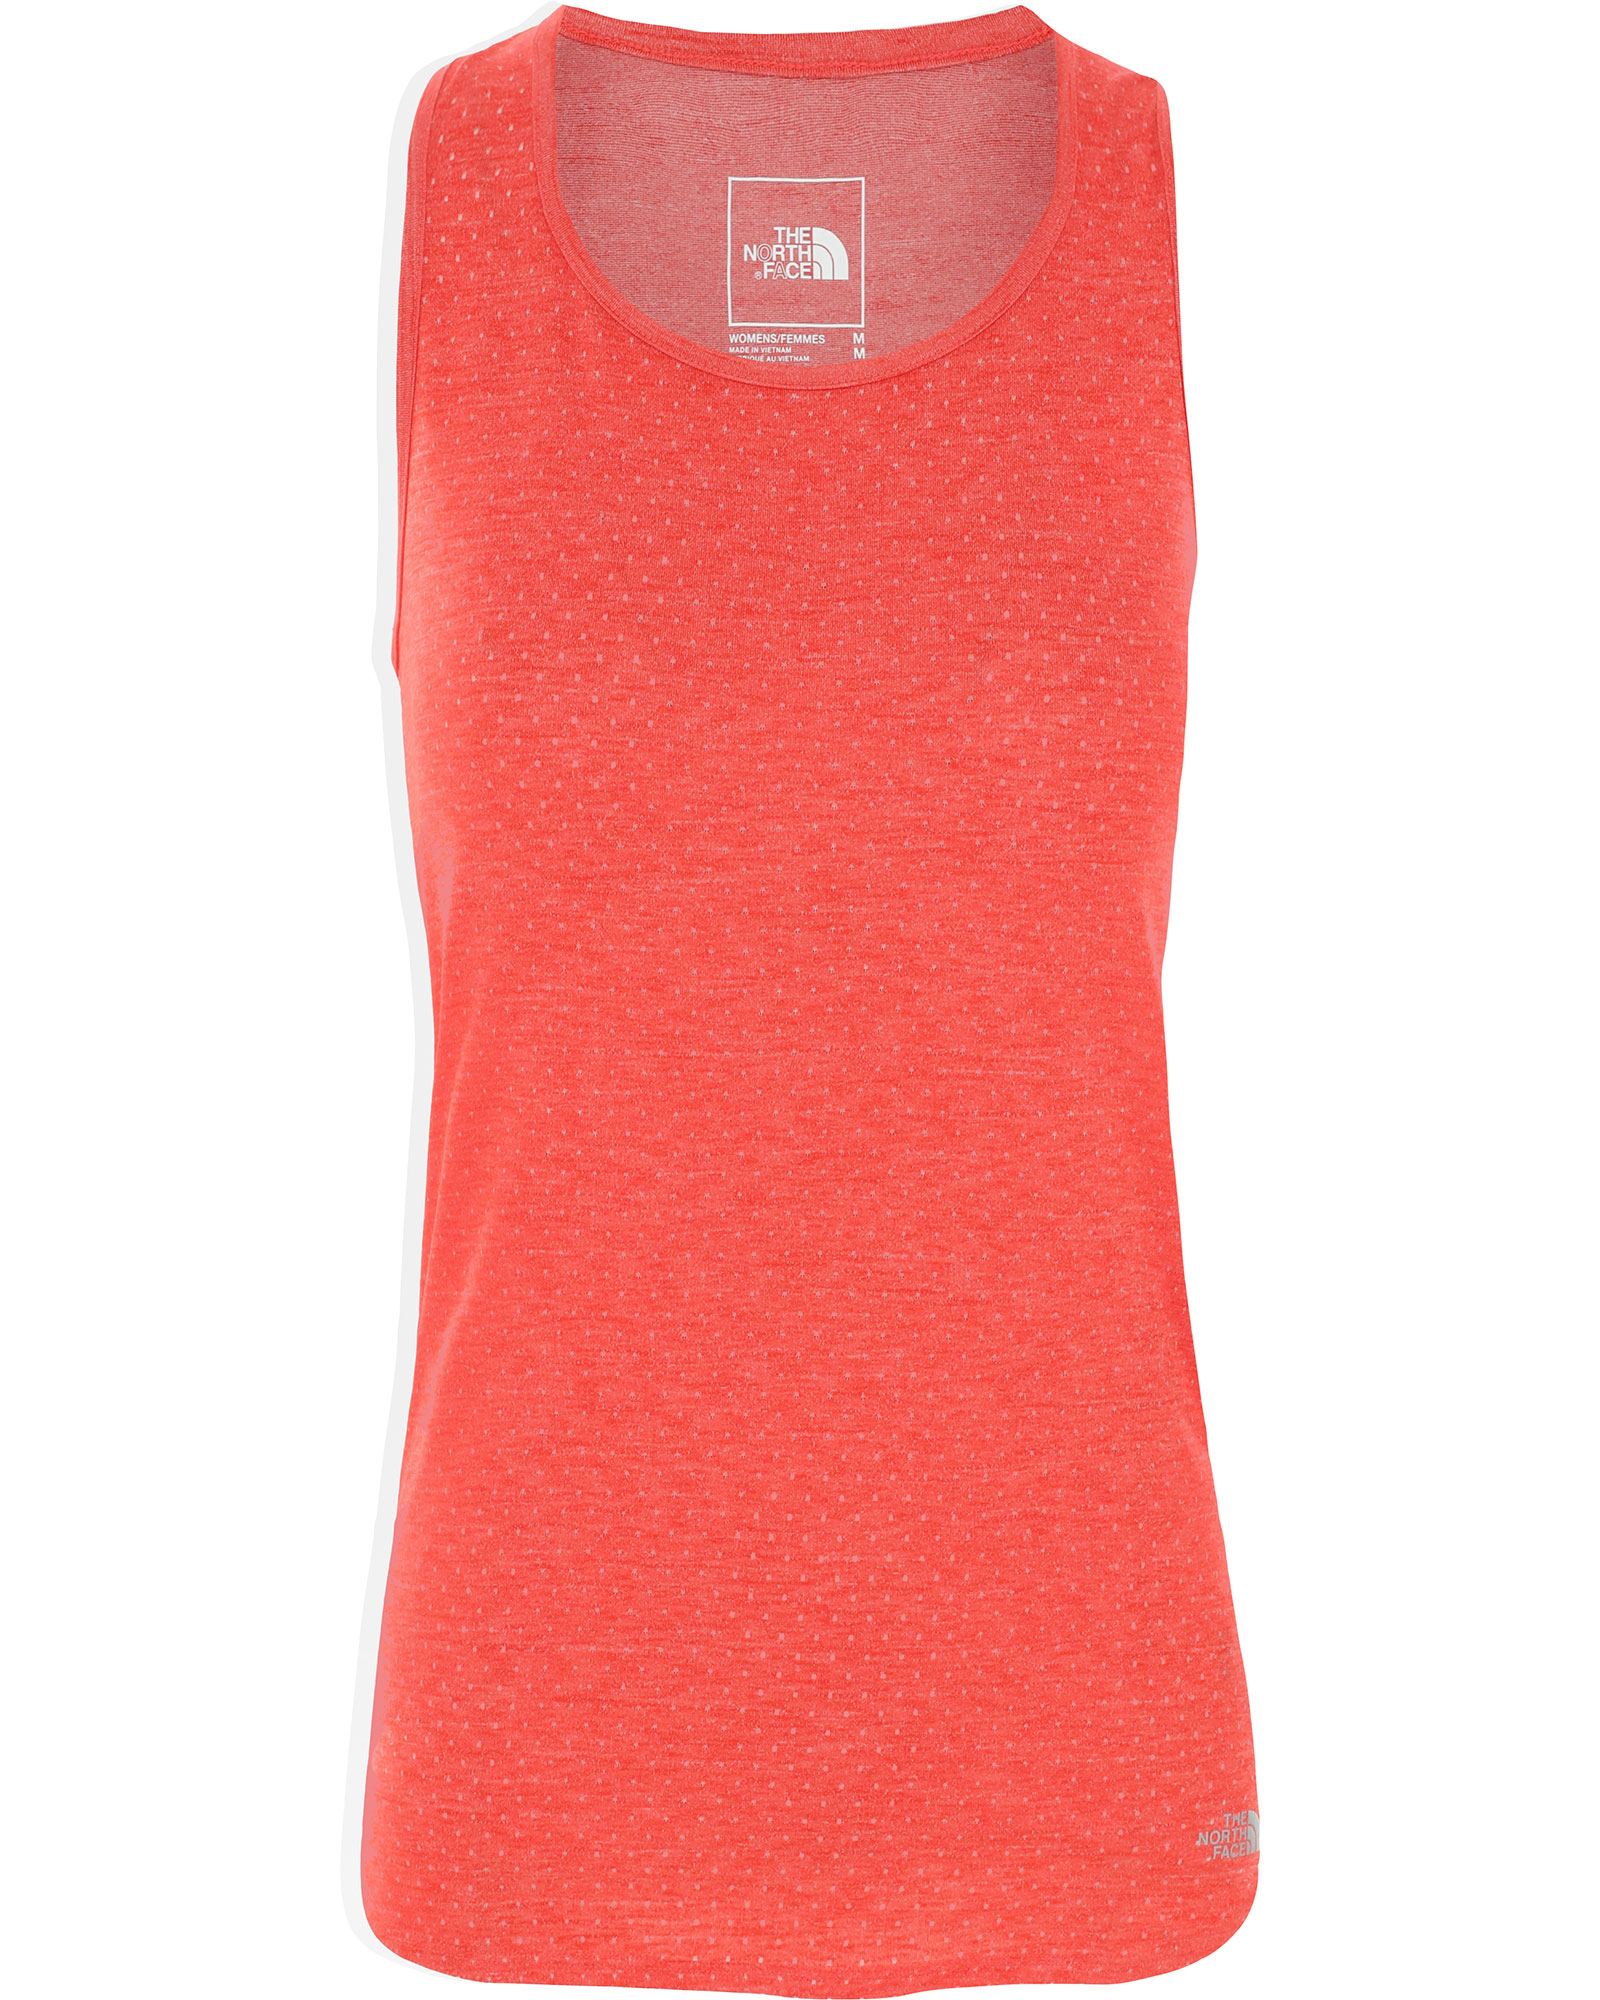 The North Face Active Trail Jacquard Women’s Tank - Cayenne Red Heather L